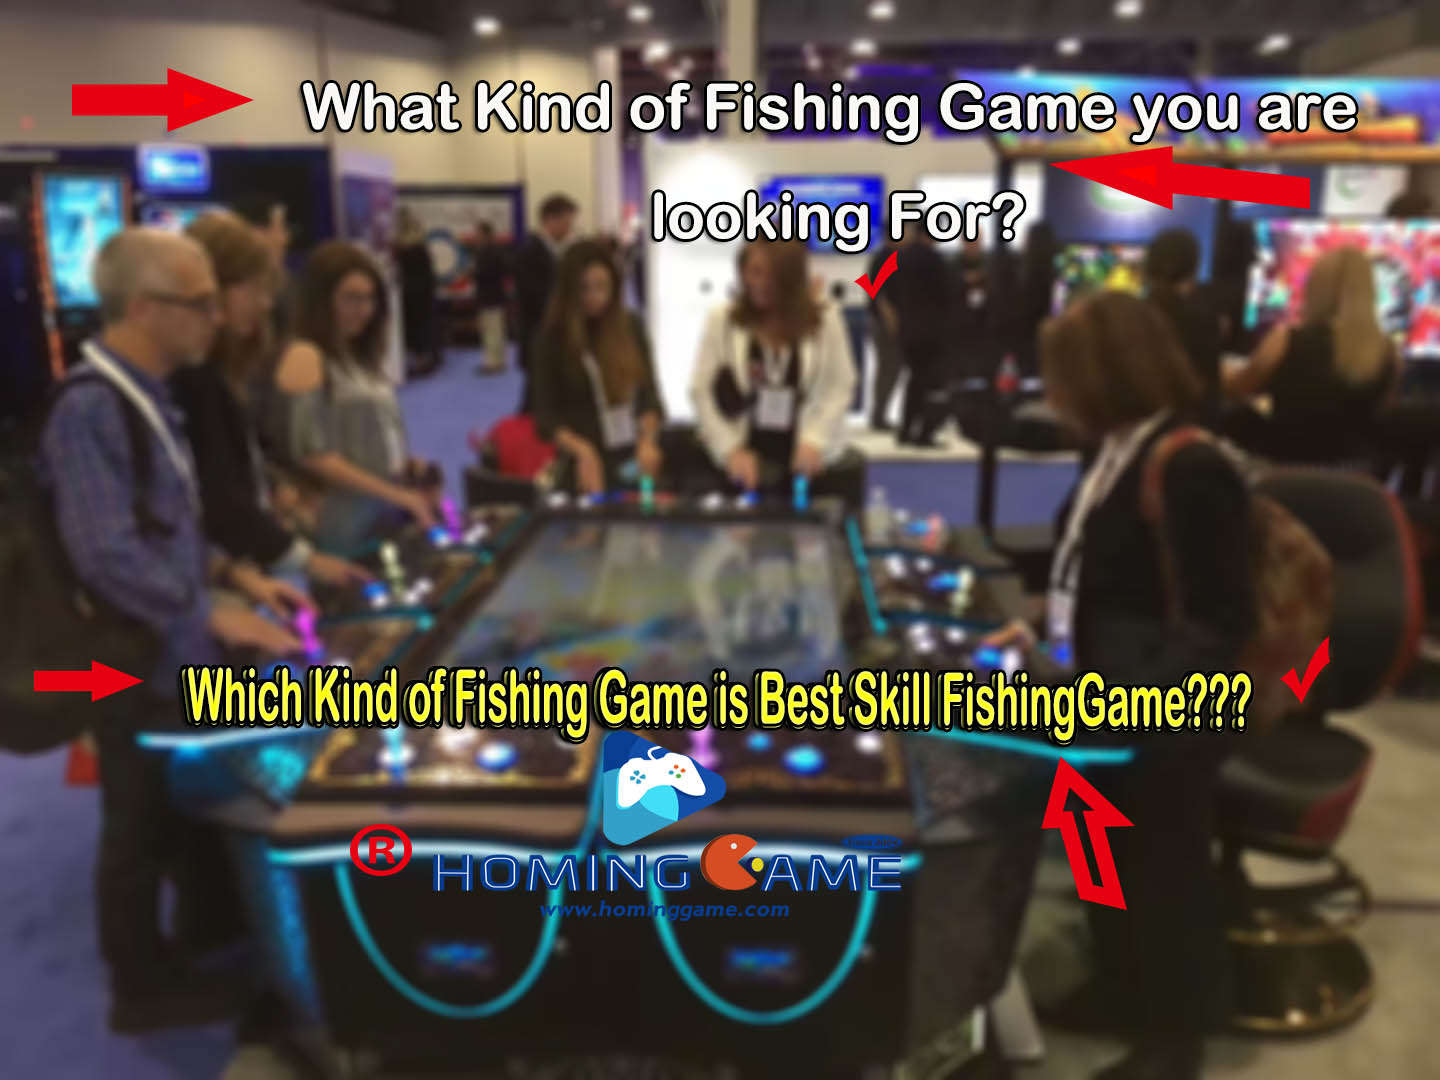 fishing game machine,ocean king 3 fishing game machine,ocean king 3 plus fishing game machine,ocean king 3 poseidon revenge fishing game machine,ocean king 3 plus poseidon revenge fishing game machine,fishing game machine tips,fishing game tricks,fishing arcade game machine,coin operated fishing game machine,fish hunter fishing game machine,igs fishing game machine,igs fishing game,igs,gaming machine,gambling machine,ocean king 3 monster awaken fishing game mahcine,ocean king 3 plus,ocean king 3 plus poseidon revenge fishing,ocean king 3 turtle revenge fishing game mahcine,ocean king 2 golden legend fishing game mahcine,casino gaming machine,ocean king 2,ocean monster fishing game machine,tiger strike fishing game machine,insect doctor fishing game machine,ocean paradise fishing game machine,mermaid fishing game machine,electrical fishing game machine,purple dragon fishing game machine,3D fishing game machine,3D kong fishing game machine,jackpot fishing game machine,fishing game machine price,fishing game machine table,fishing game machine upright table,6 palyers fishing game machine table,treasure king fishing game mahcine,purple dragon fishing game,angry deep whale fishing game mahcine,angry bird fishing game machine,space war fishing game machine,war strike fishing game machine,catch fishing game,coin opereated fishing game machine,skill fishing gaming machine,skill fishing gaming,game machine,arcade game machine,coin operated game machine,entertainment game machine,entertainment,casino gaming,casino gambling,fishing arcade,upright fishing game machine,shooting zombies fishing game machine,hominggame,www.hominggame.com,simulator game machine,video game machine,gametube.hk,www.gametube.hk,hominggame fishing game,hominggame gaming machine,slot gaming machine,slot machine,slot gaming,ocean king 3 plus fishing table game,ocean king,3D ocean monster fishing game machine,insect doctor fishing,kongfu panda fishing game mahcine,red dragon fishing game machine,green dragon fishing game machine,thunder dragon fishing game machine,Fishing Game Machine,Arcade Fishing Game Machine,The fishing-themed slot machines,Fishing slot machine,electronic amusement fishing game machine,fishing table game machine,master finish game screen,fish hunter plus arcade,,redemption game catch fish,, ocean star 2 medal game instructions,fish hunter ticket redeem strategy,fishing hunter coin machine,fish hunter plus game,arcade fishing games,download+Amusement Fishing Game Machine,best gun for fish hunter arcade game,fish hunter gaming machines cash out key,prices for 4 player ocean star fishing game,Gamefish machine,oregon lottery arcade fish hunter game,how to play 